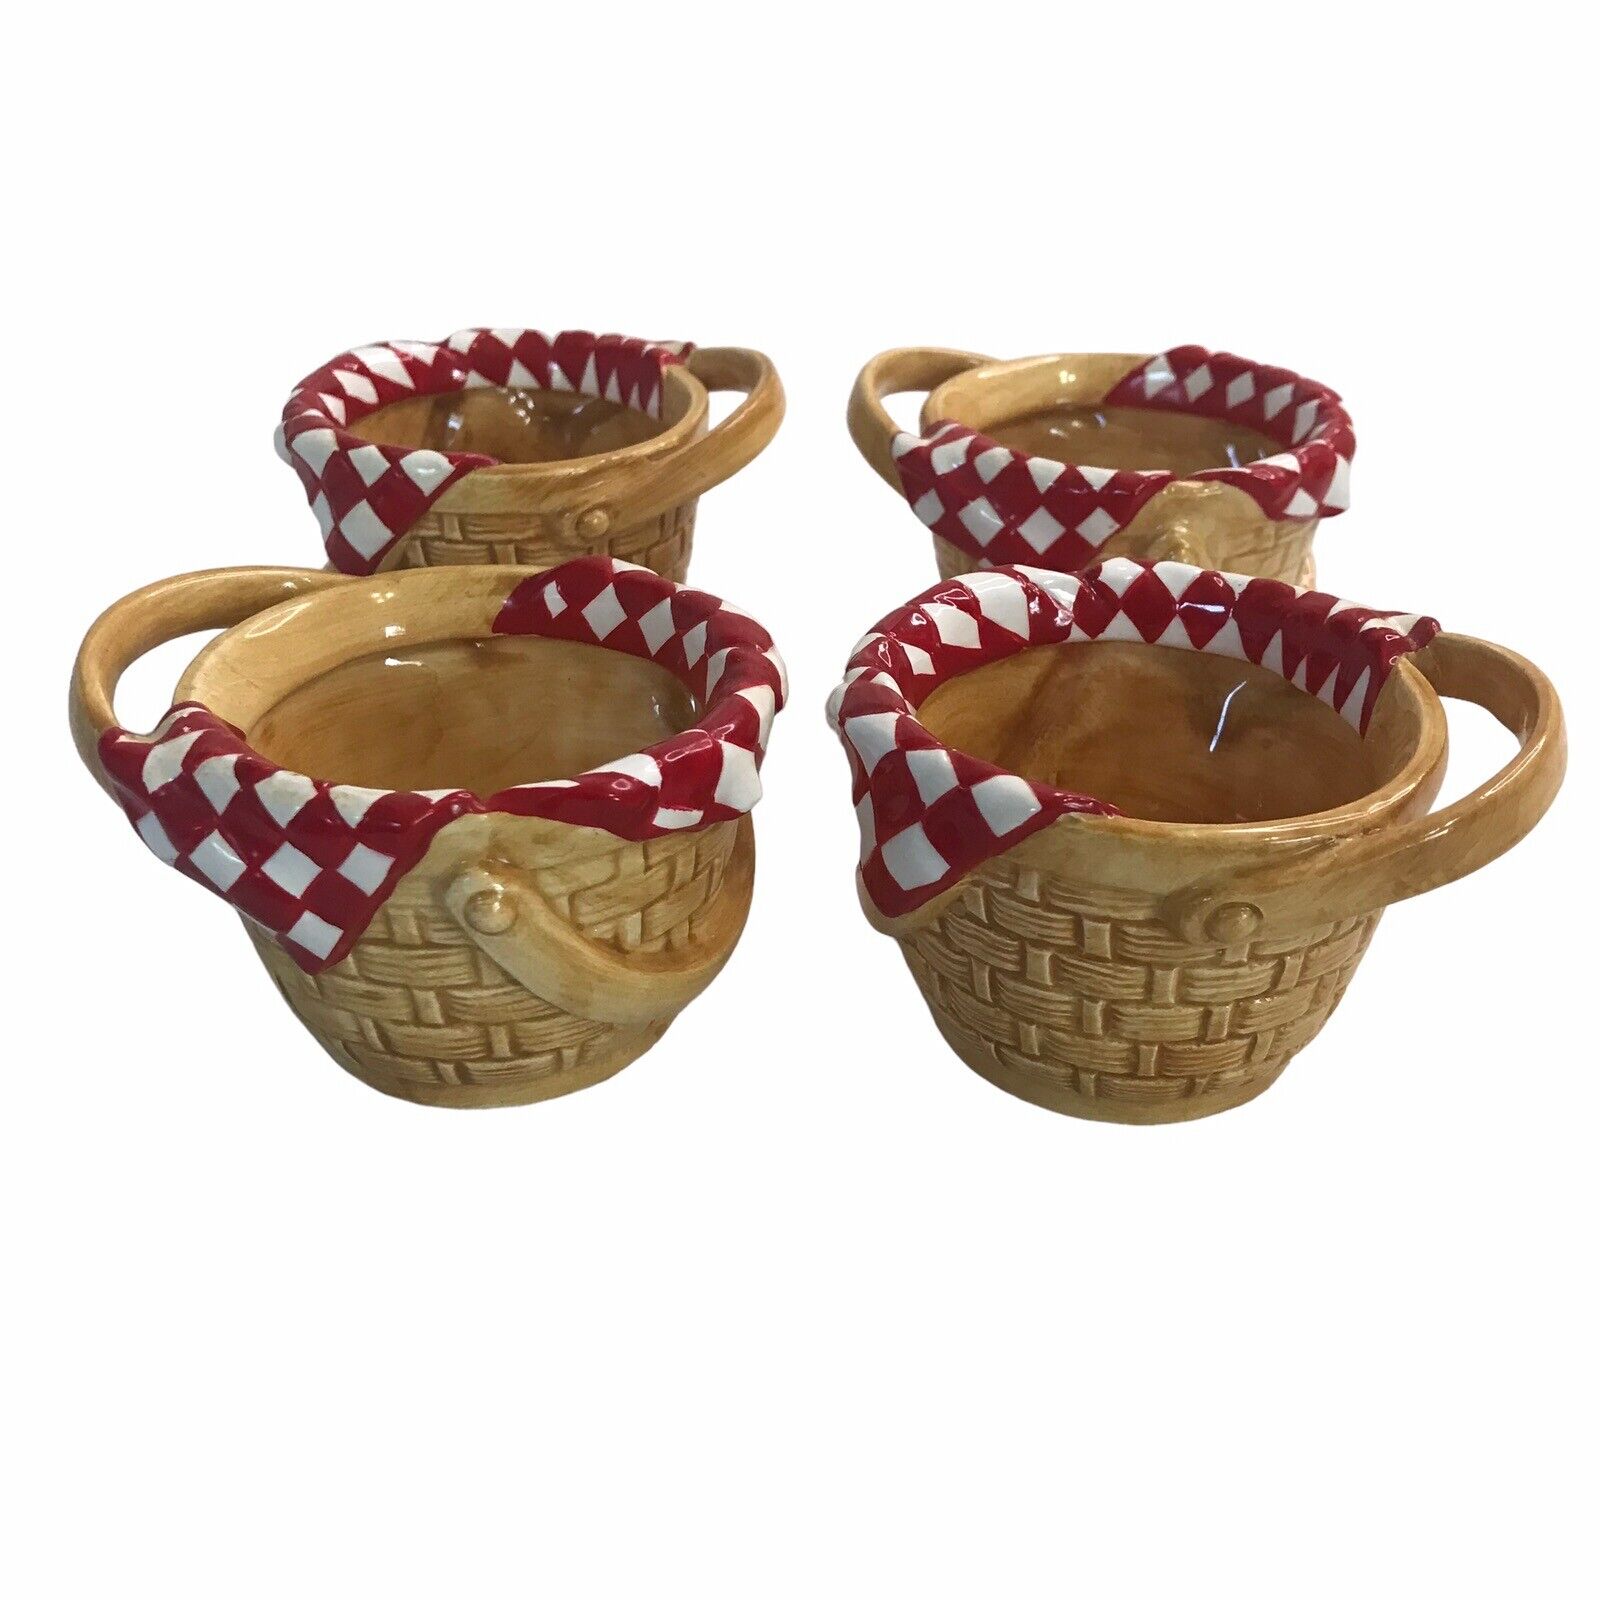 Set of 4 Dept 56 Wicker Picnic Basket Tea Cups Red Riding Hood Replacement Mugs